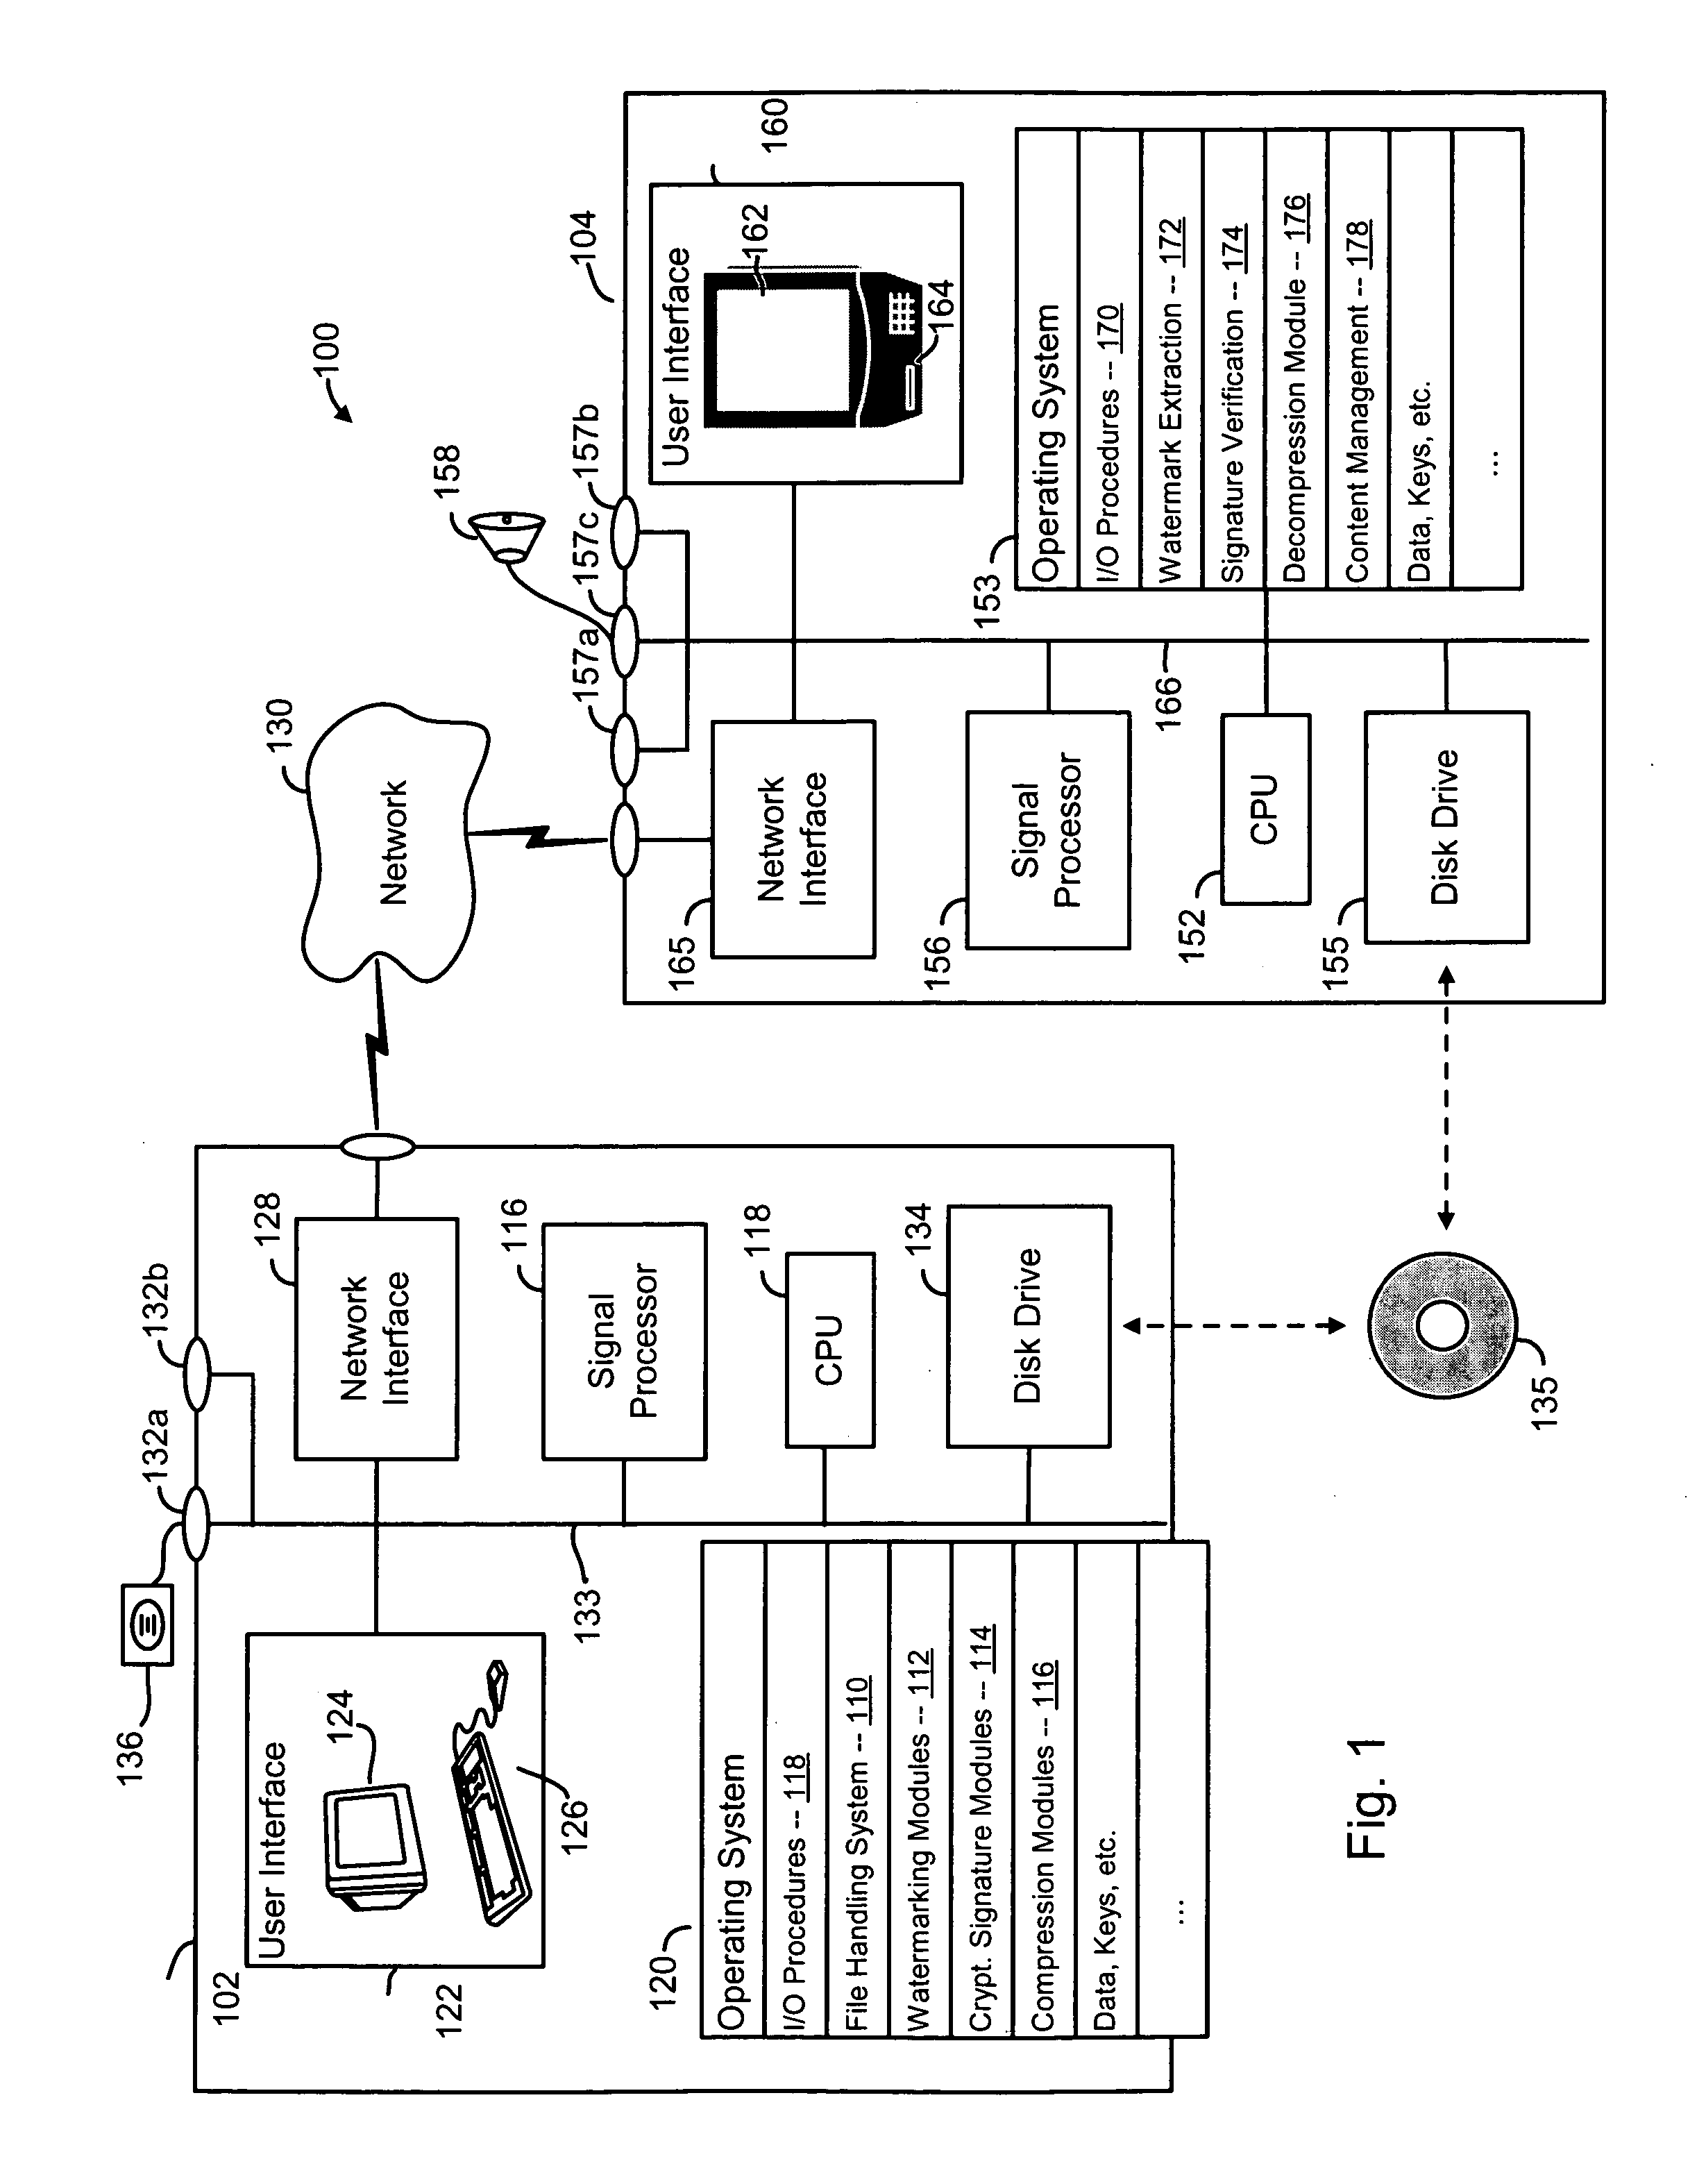 Methods and systems for encoding and protecting data using digital signature and watermarking techniques